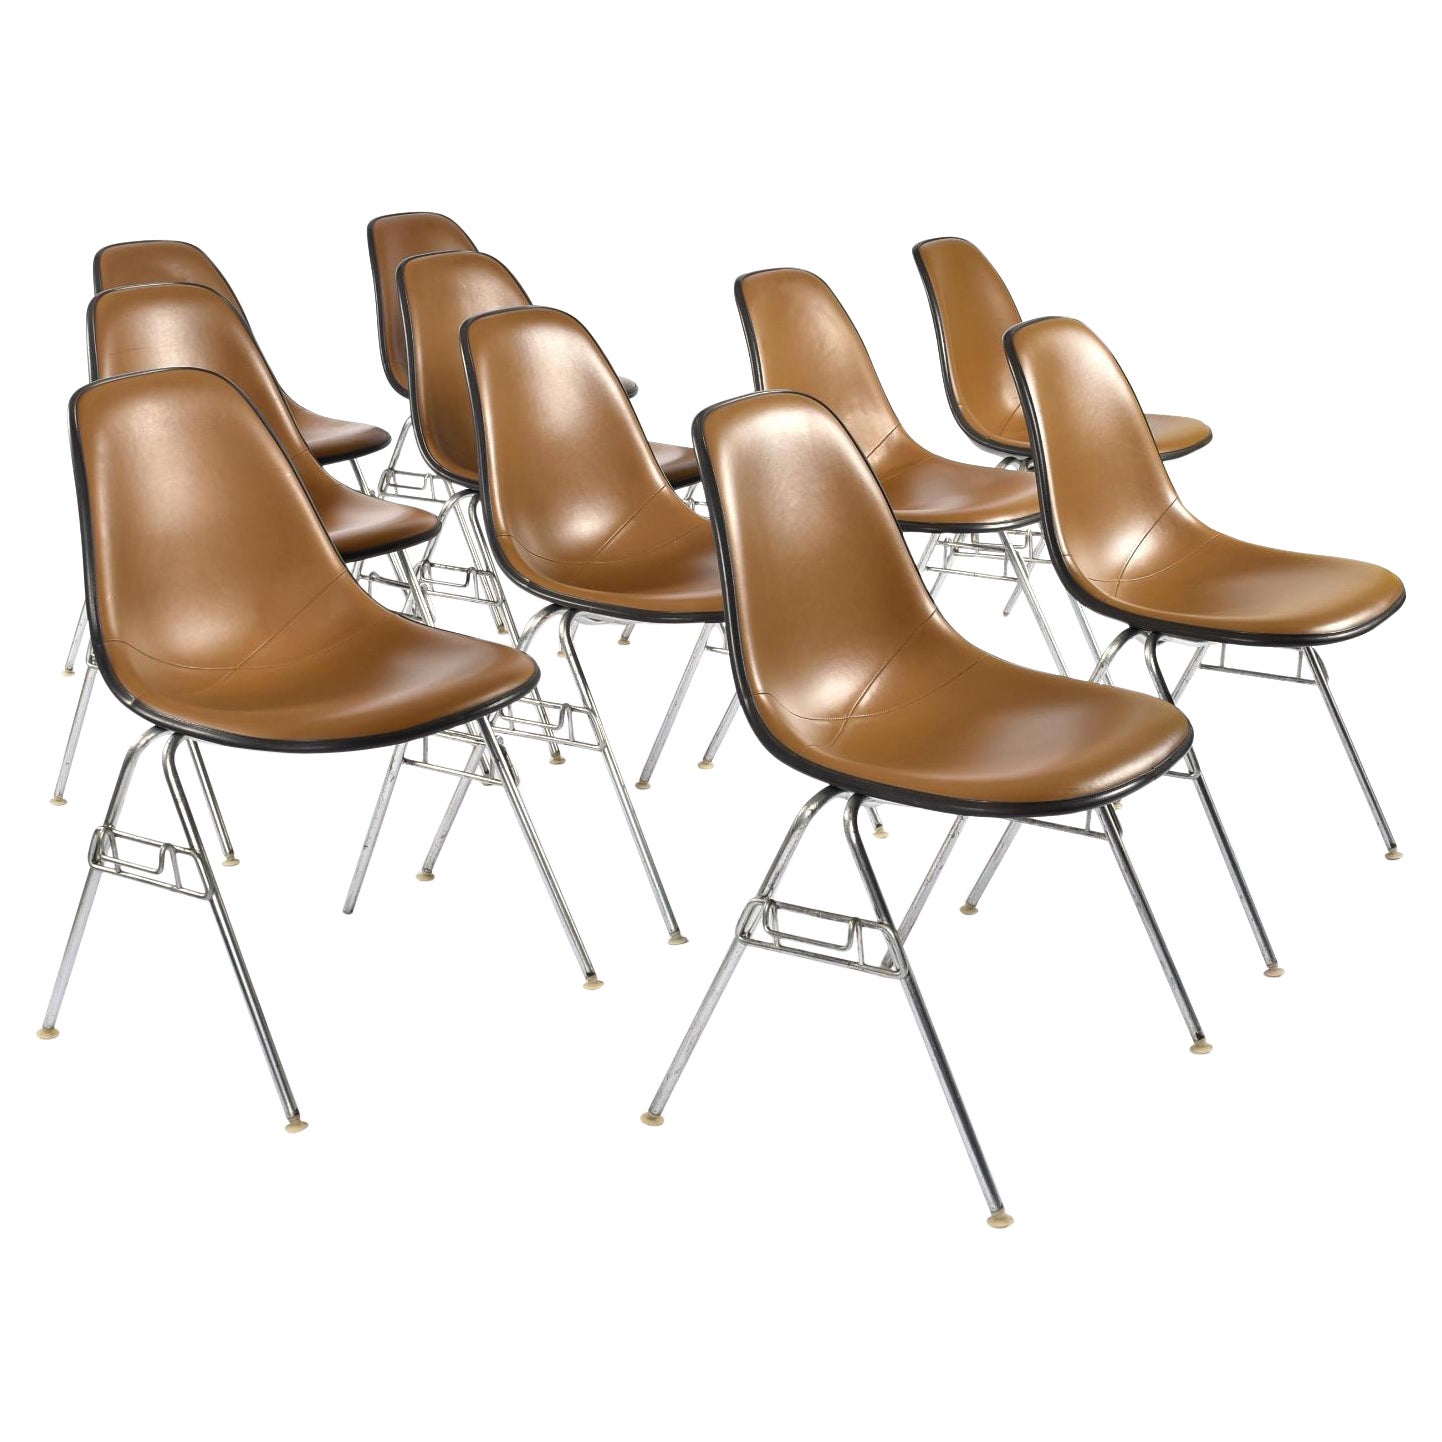 Where can I buy Herman Miller chairs?